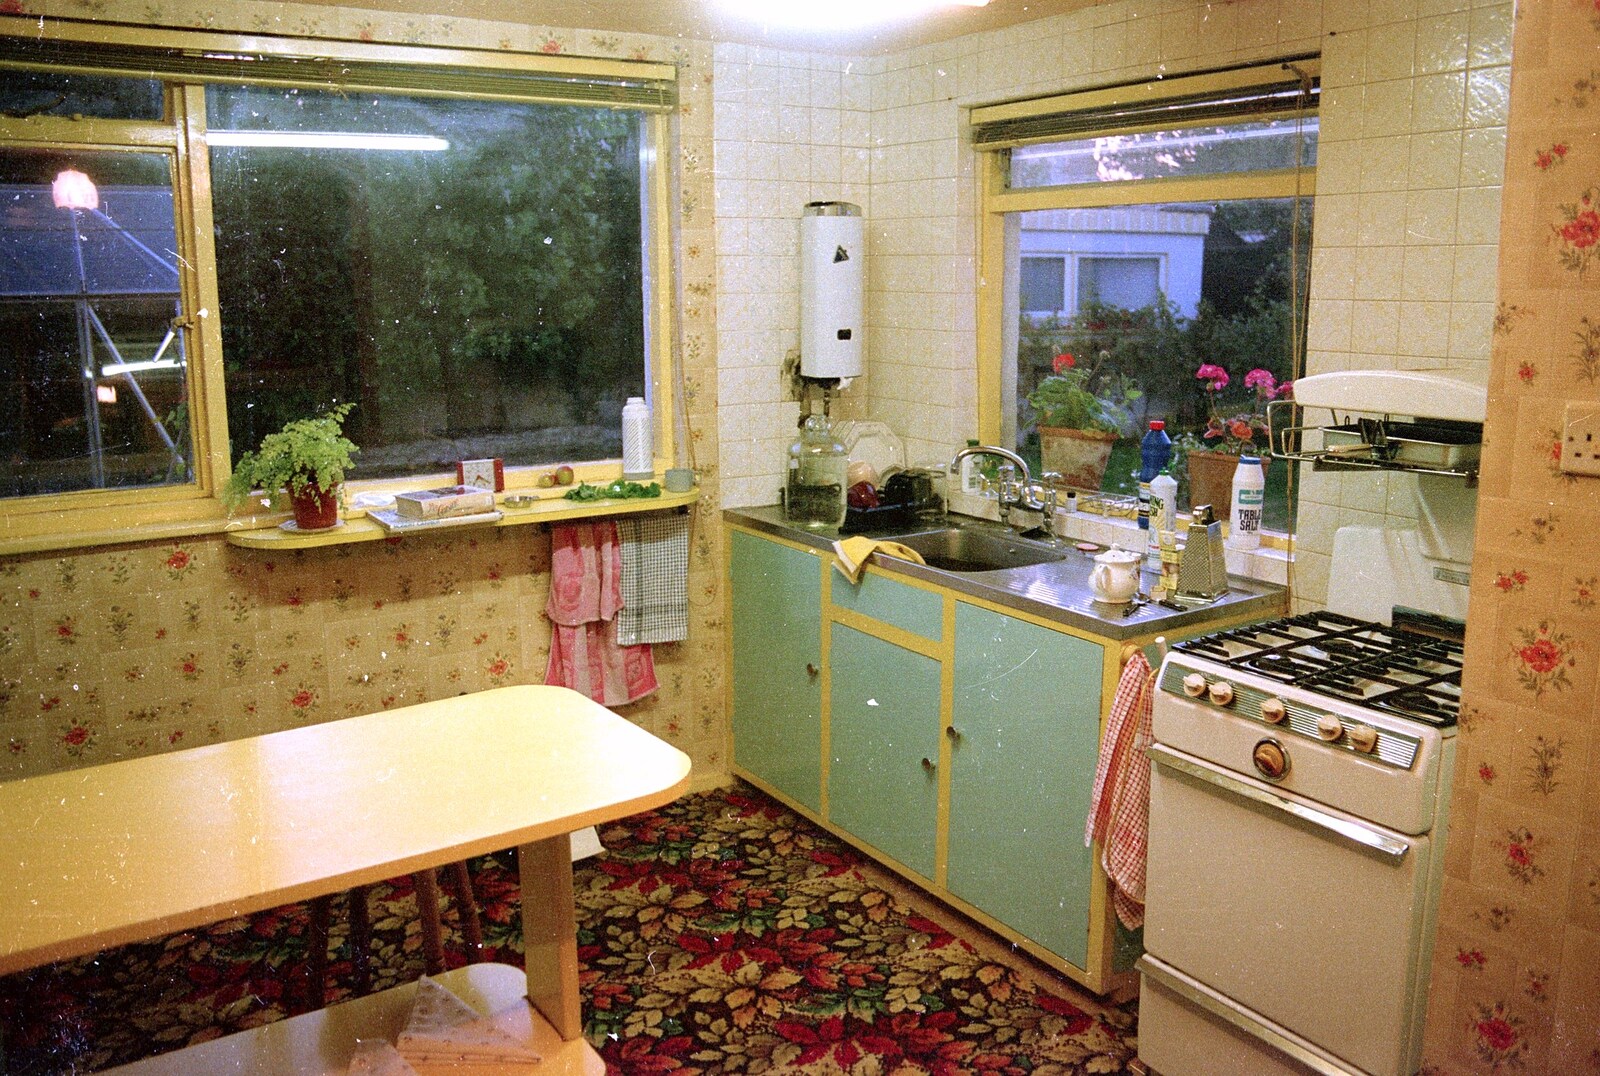 The classic kitsch of a 60s or 70s kitchen from Bracken Way, Walkford, Dorset - 15th September 1986